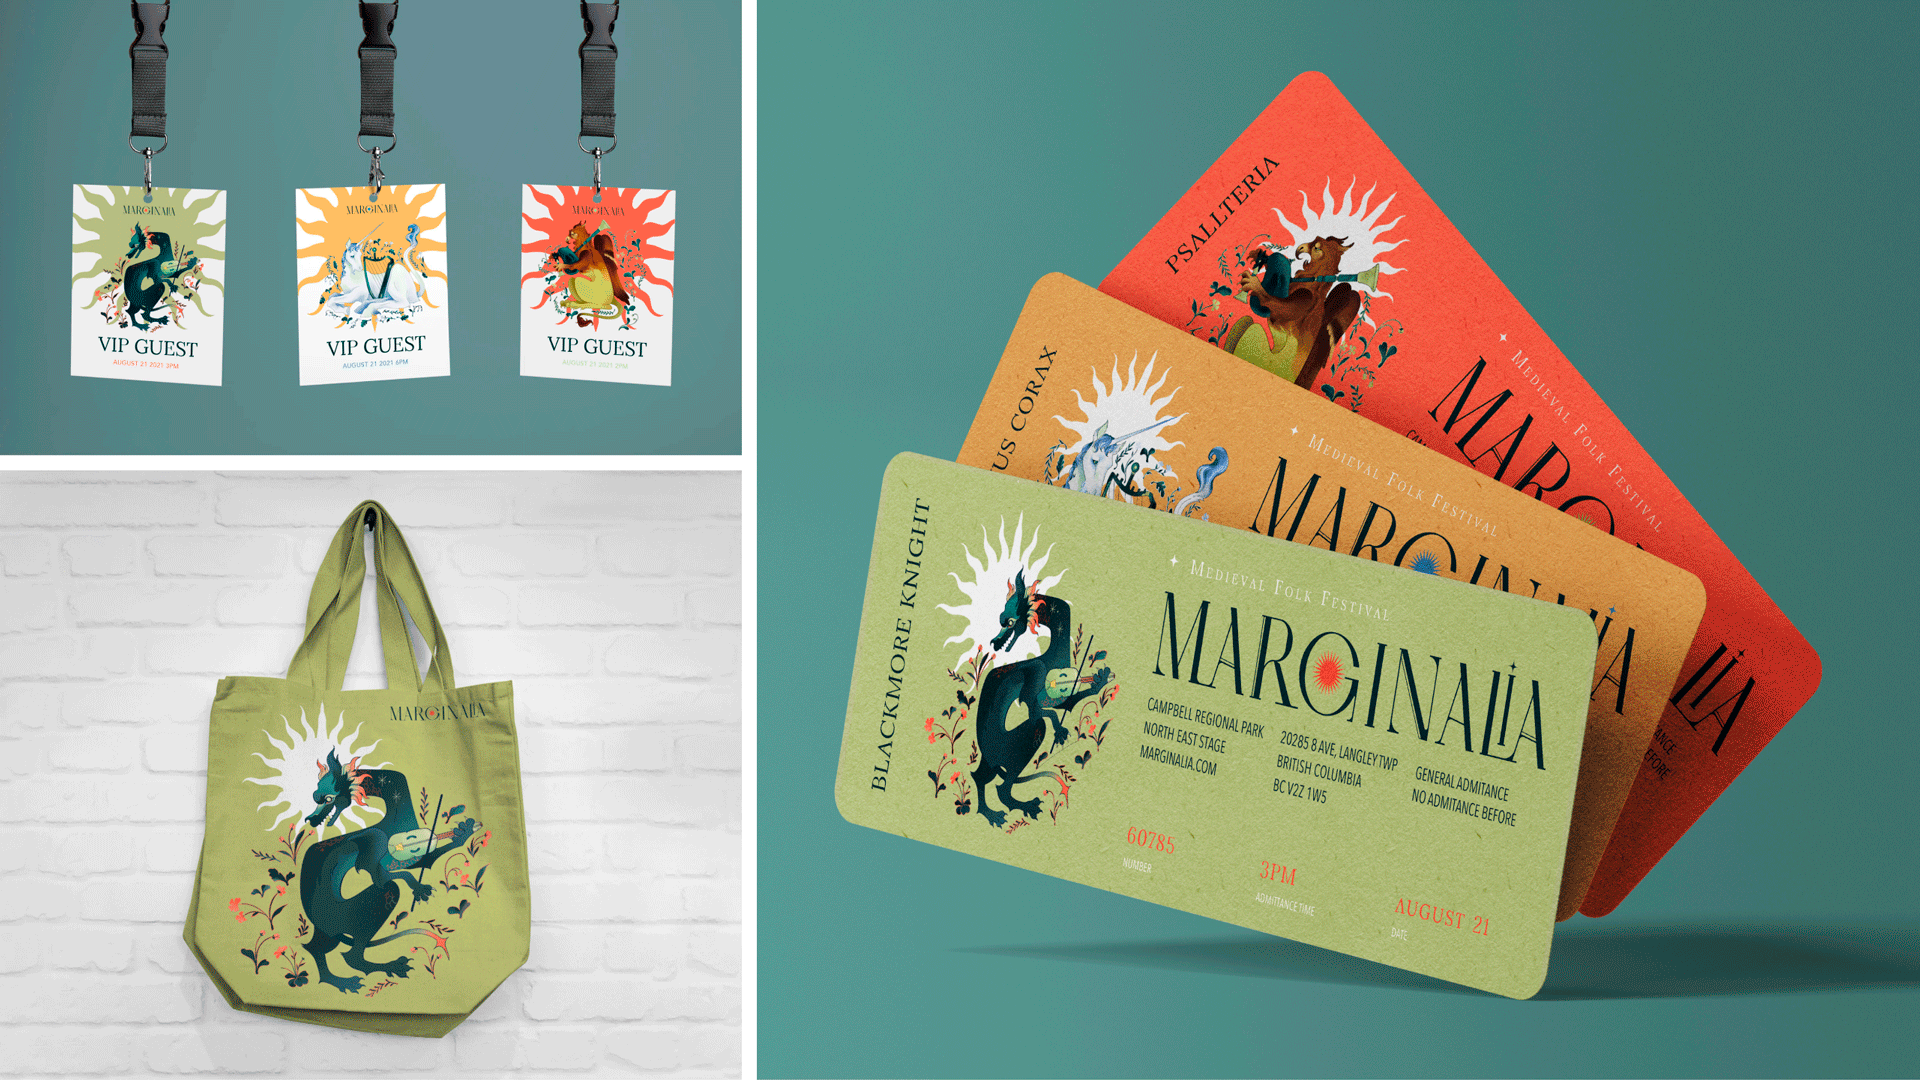 An image showing Id tags, tote bags and tickets for Marginalia: A Medieval Folk Music Festival. There are 3 tickets, each of which are a different colour and feature a different illustration of a mythical creature. The light green ticket features a turquoise dragon, the yellow ticket features a white unicorn, and the red ticket features a brown griffin. There are 3 ID tags, each of which have staff written on them and feature the same dragon, unicorn and griffin illustration. There is a gif of a tote bag that cycles through different coloured bags each of which feature either the illustration of the dragon, unicorn or griffin.